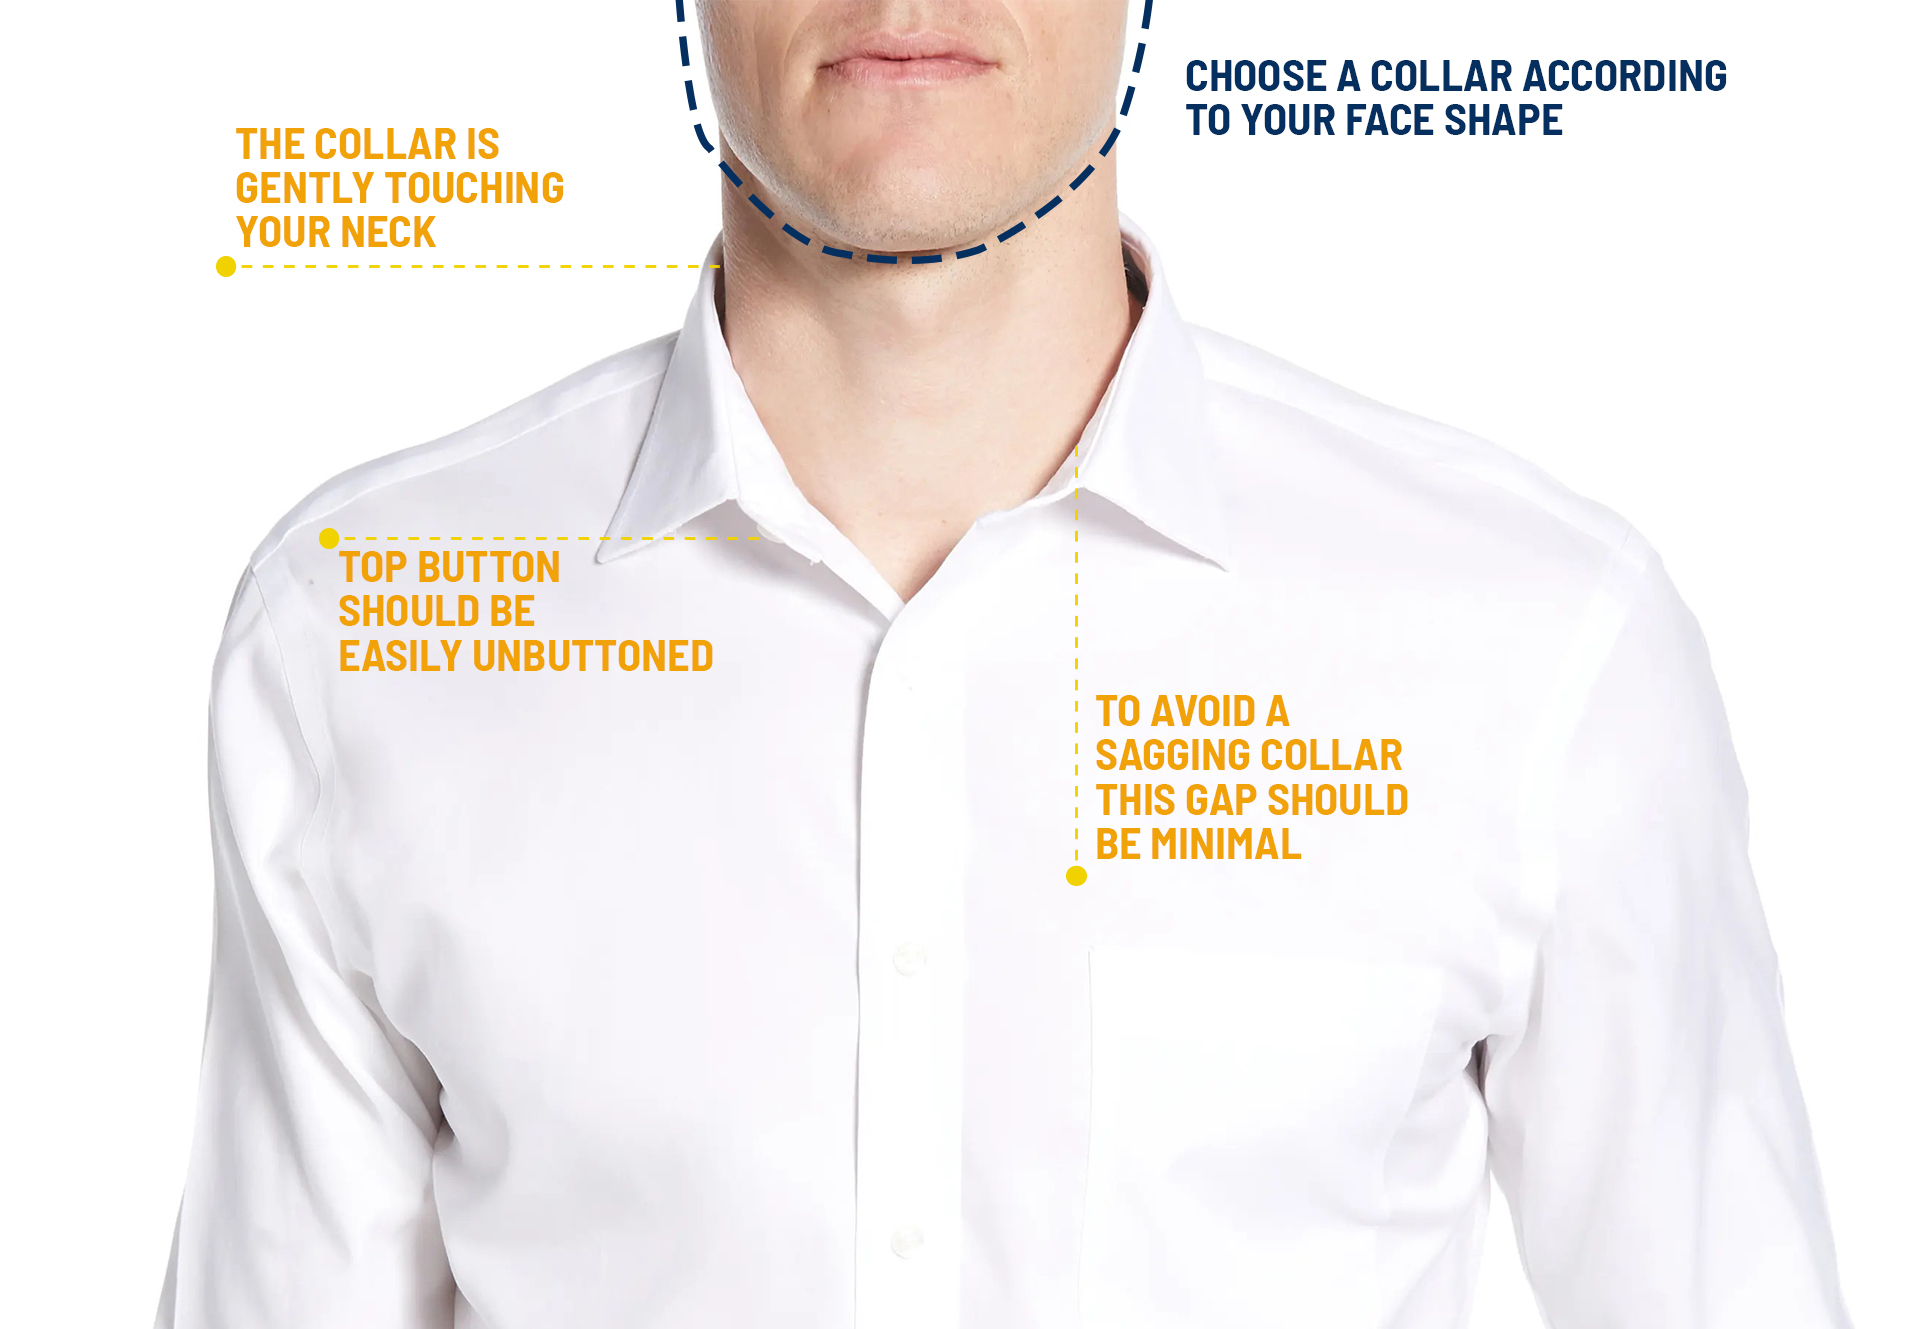 How should the dress shirt collar fit